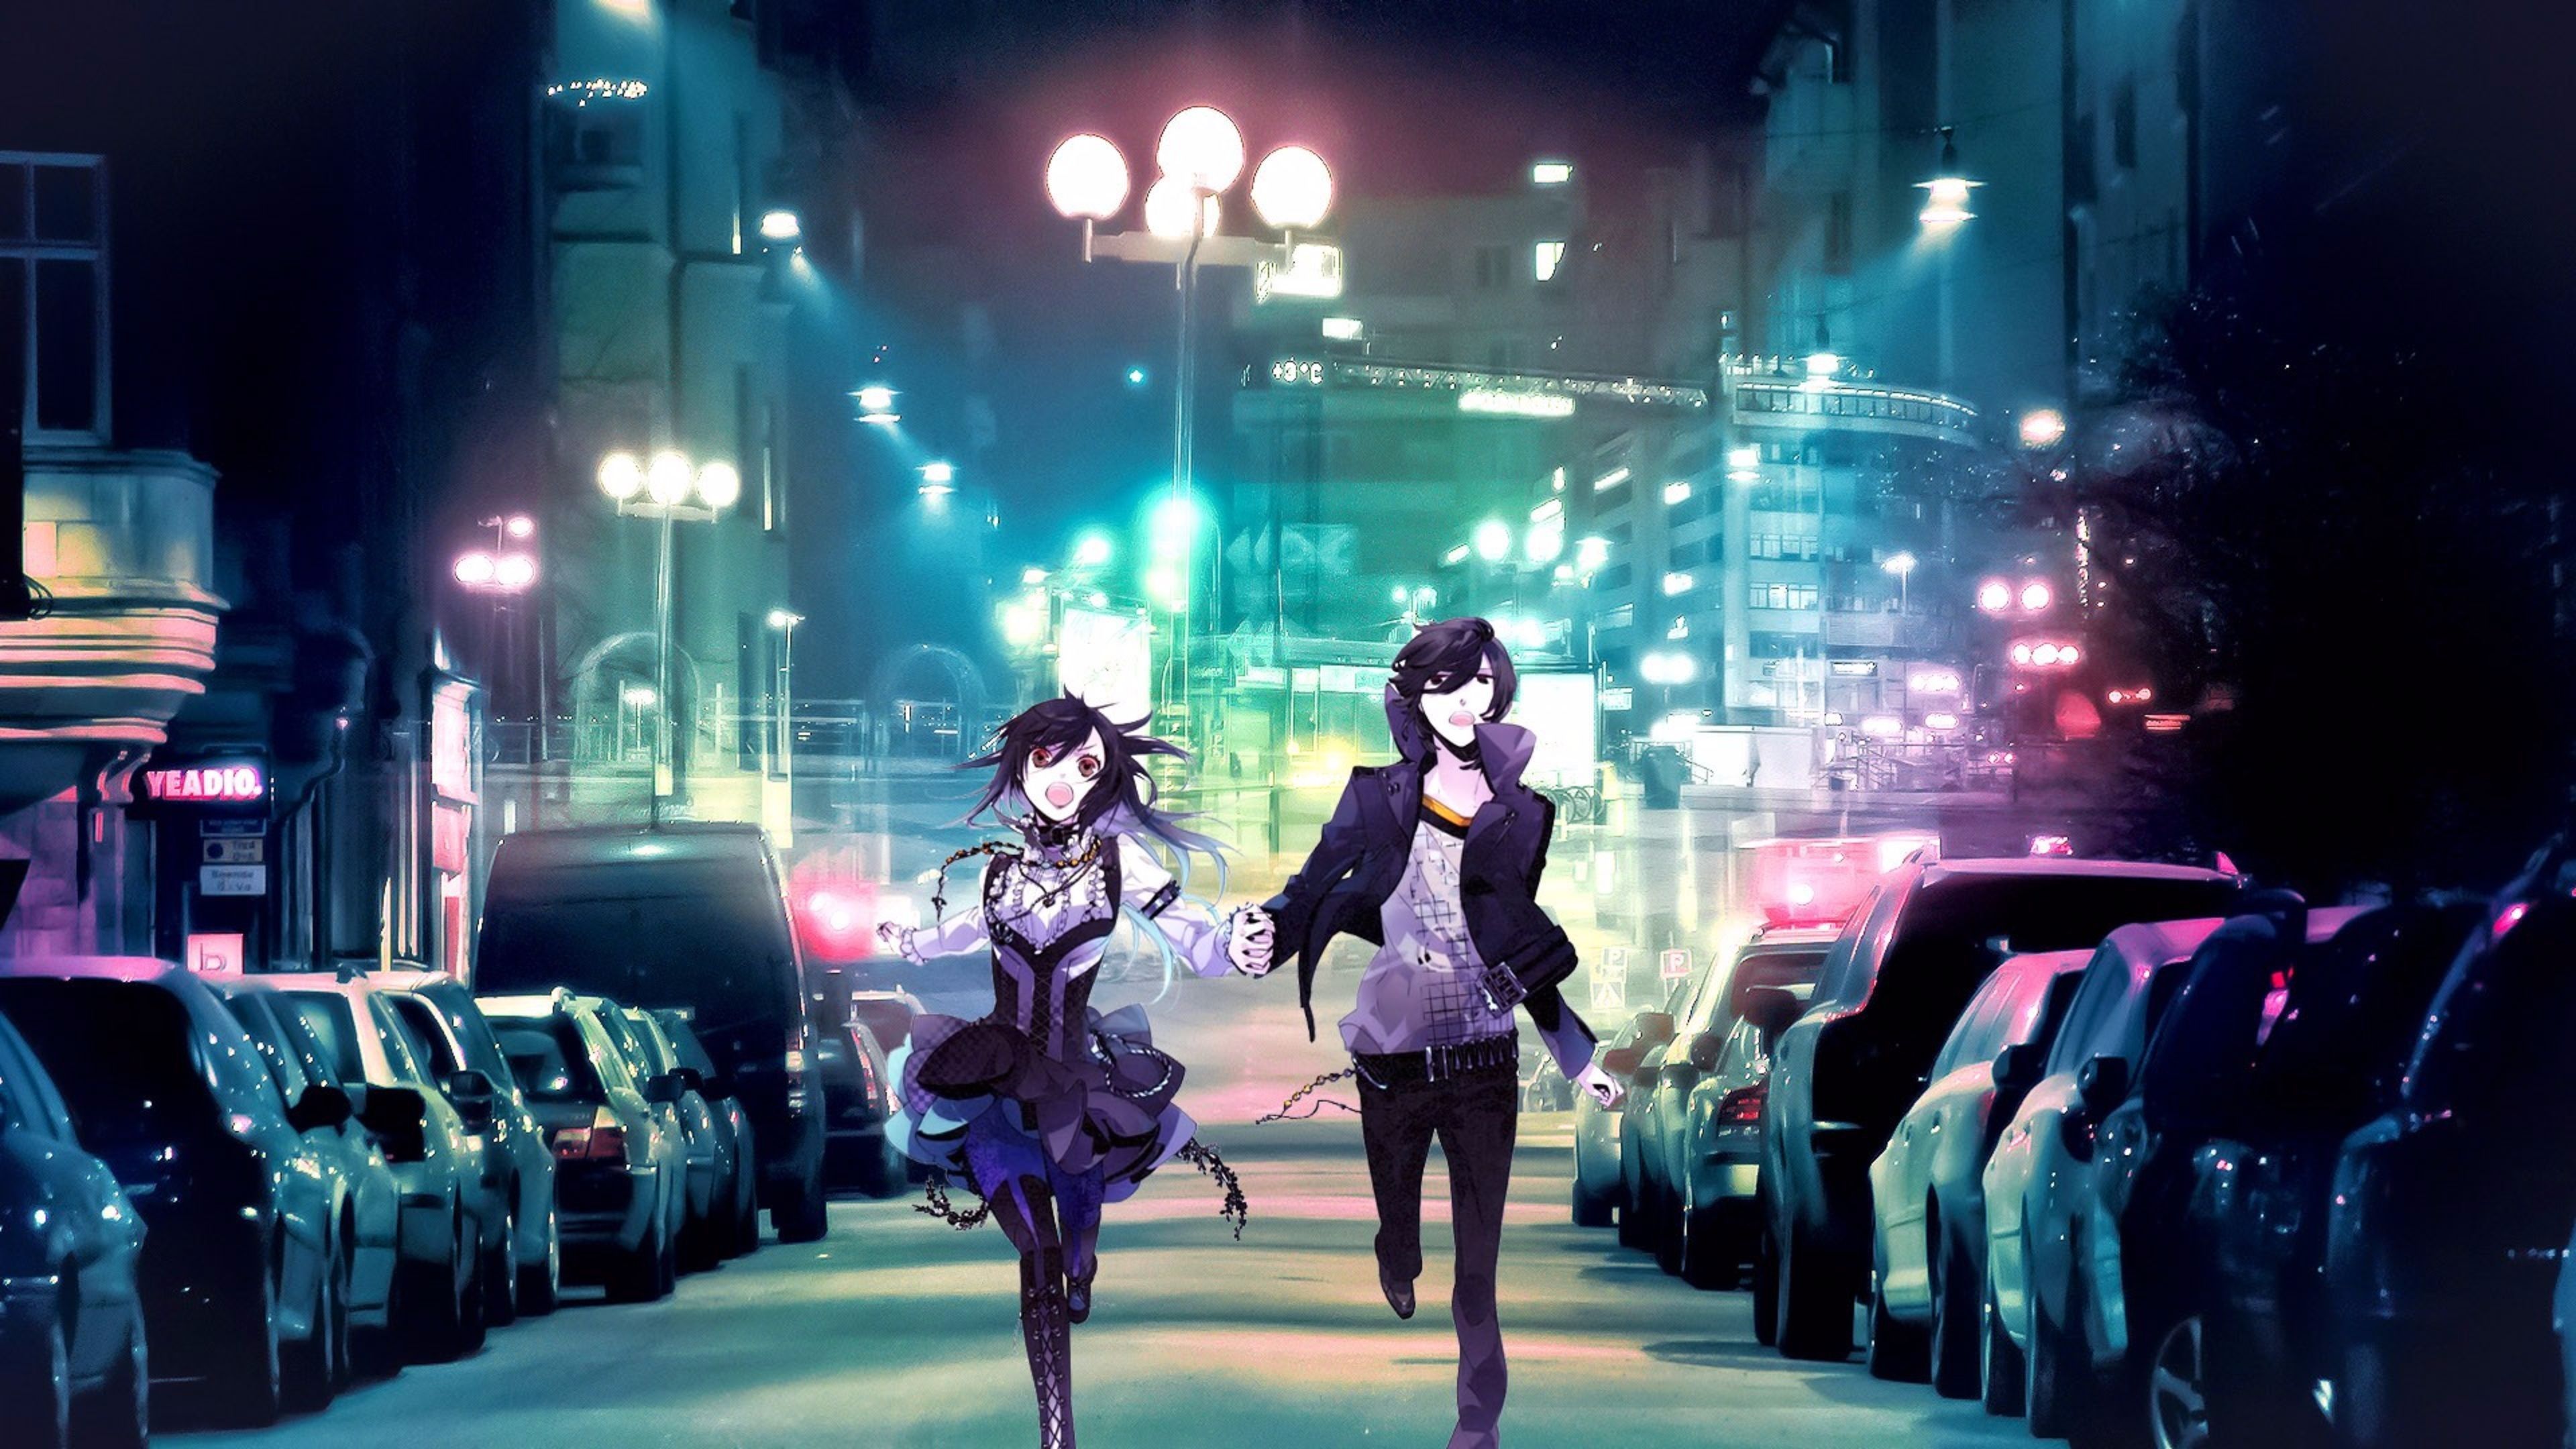 Two anime girls walking down the street at night - Anime city